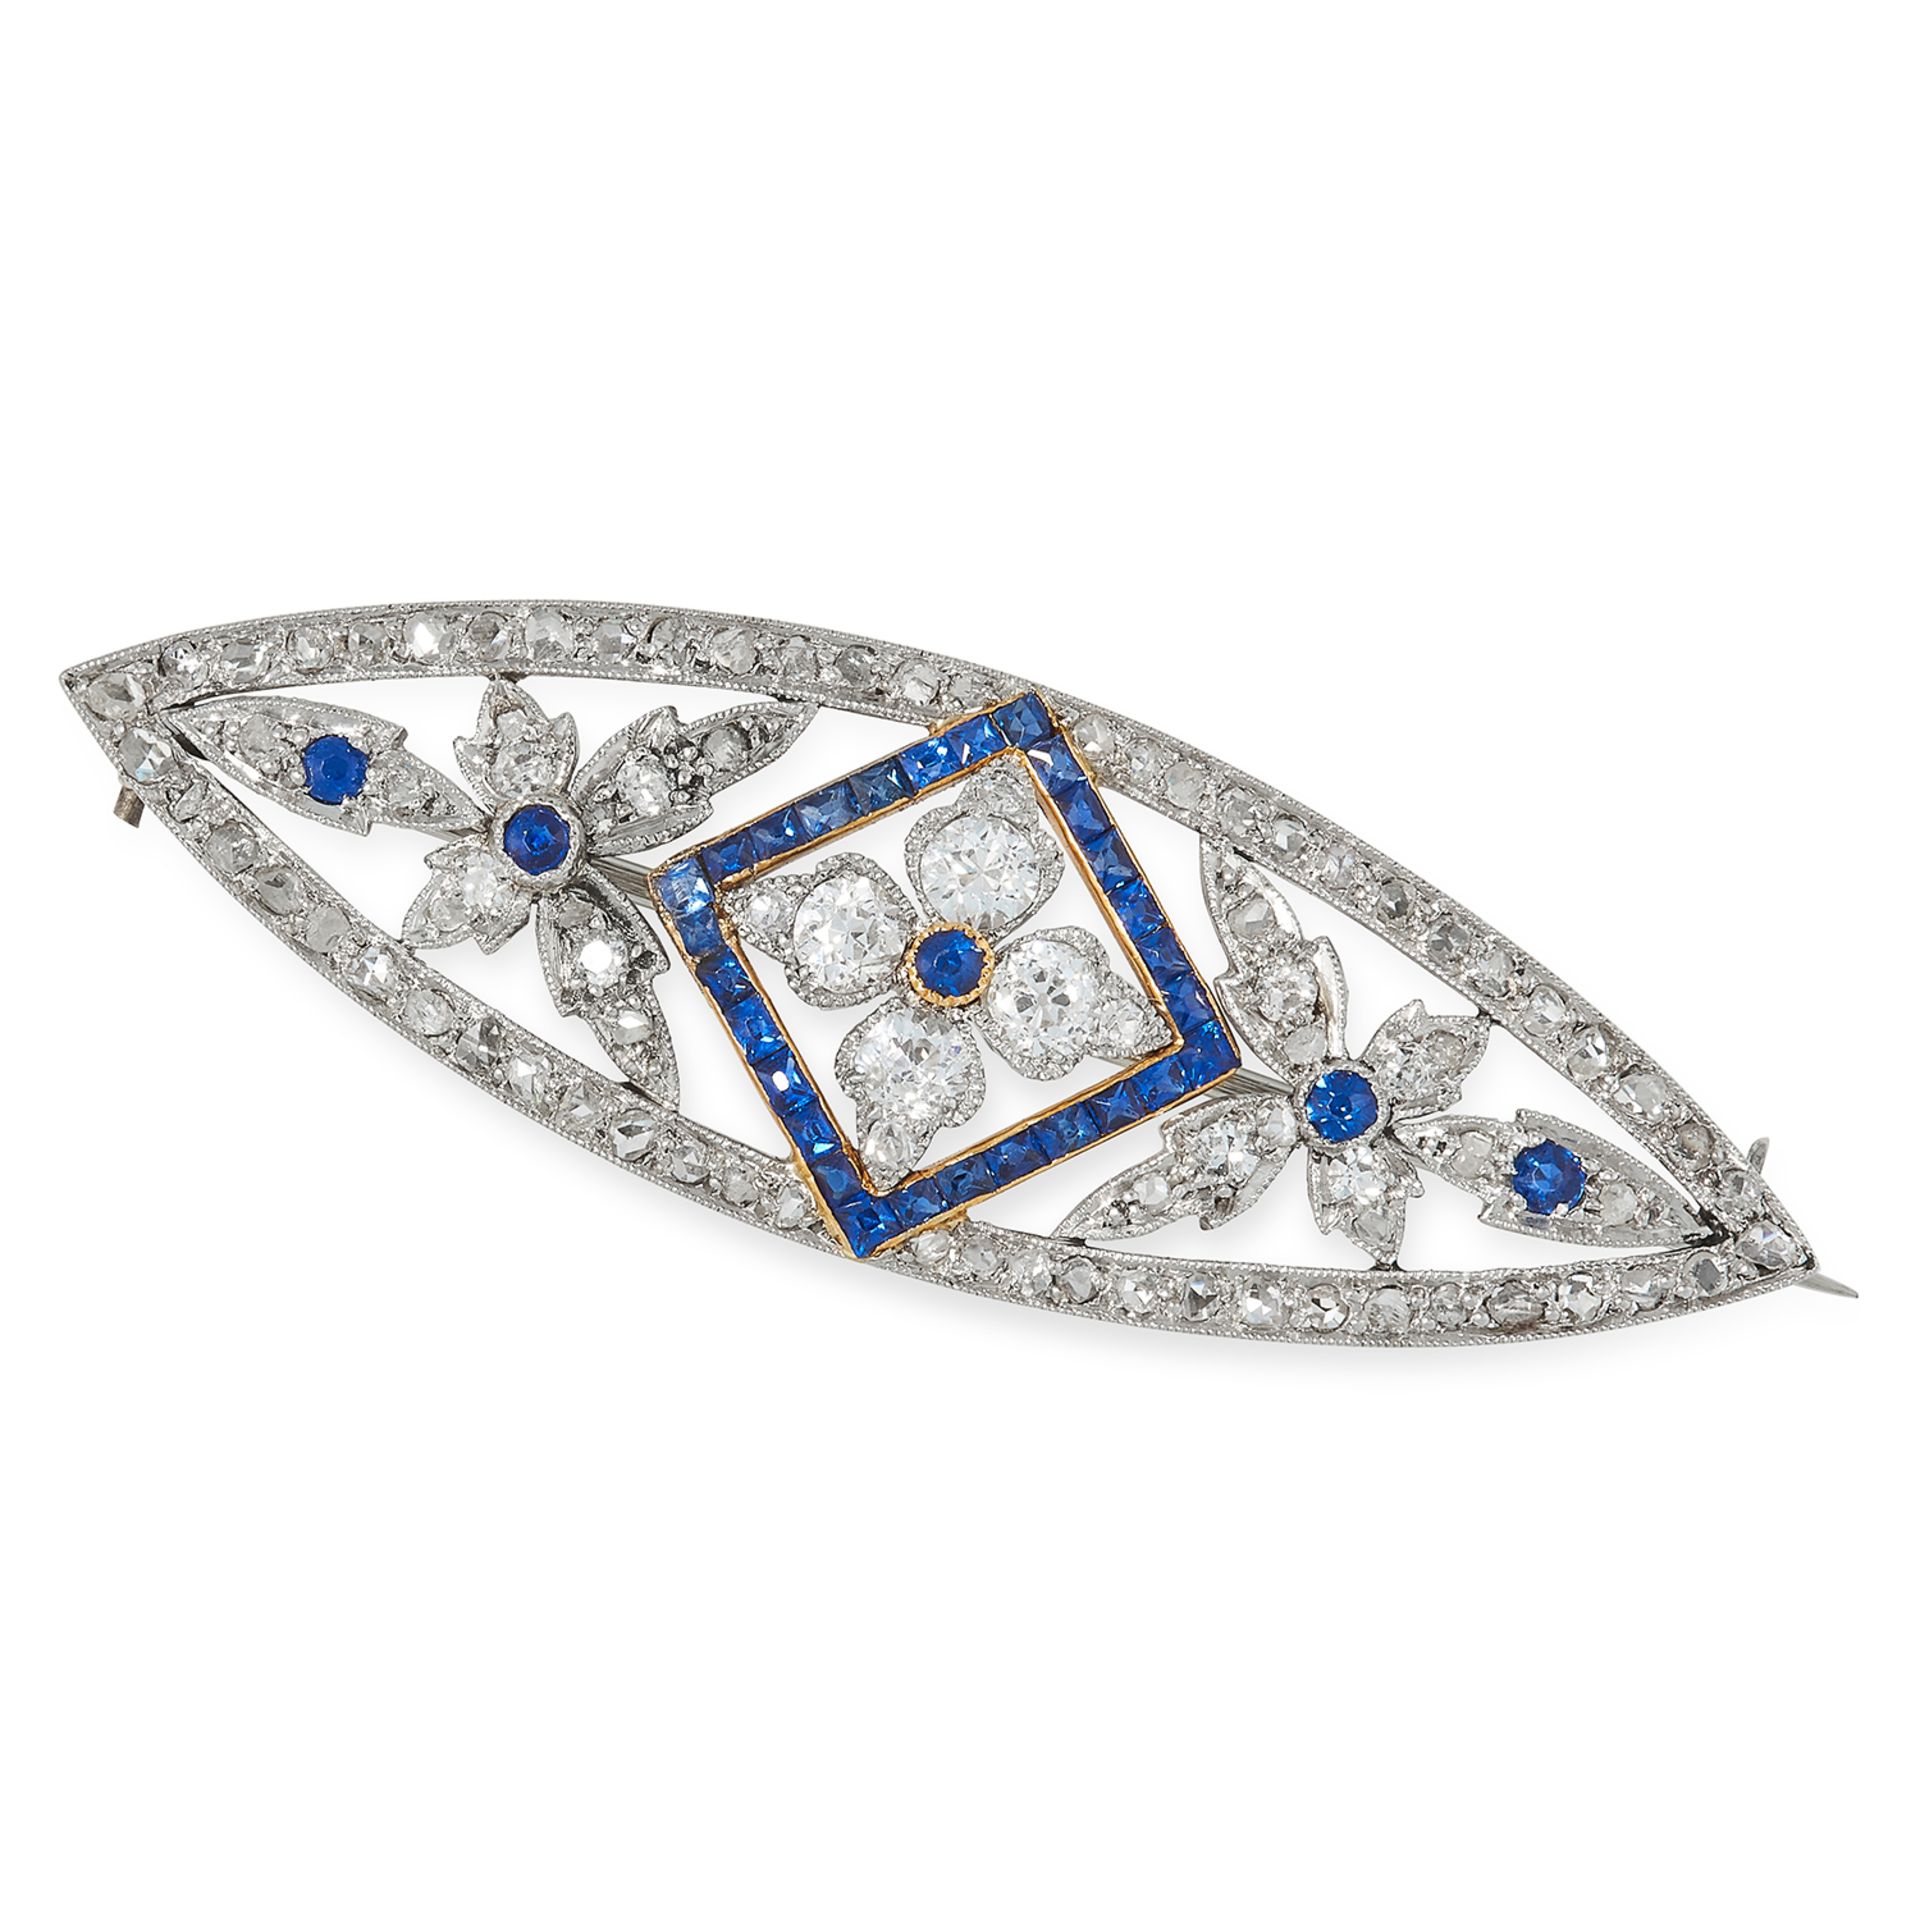 SAPPHIRE AND DIAMOND BROOCH in foliate design set with step and round cut sapphires and round and